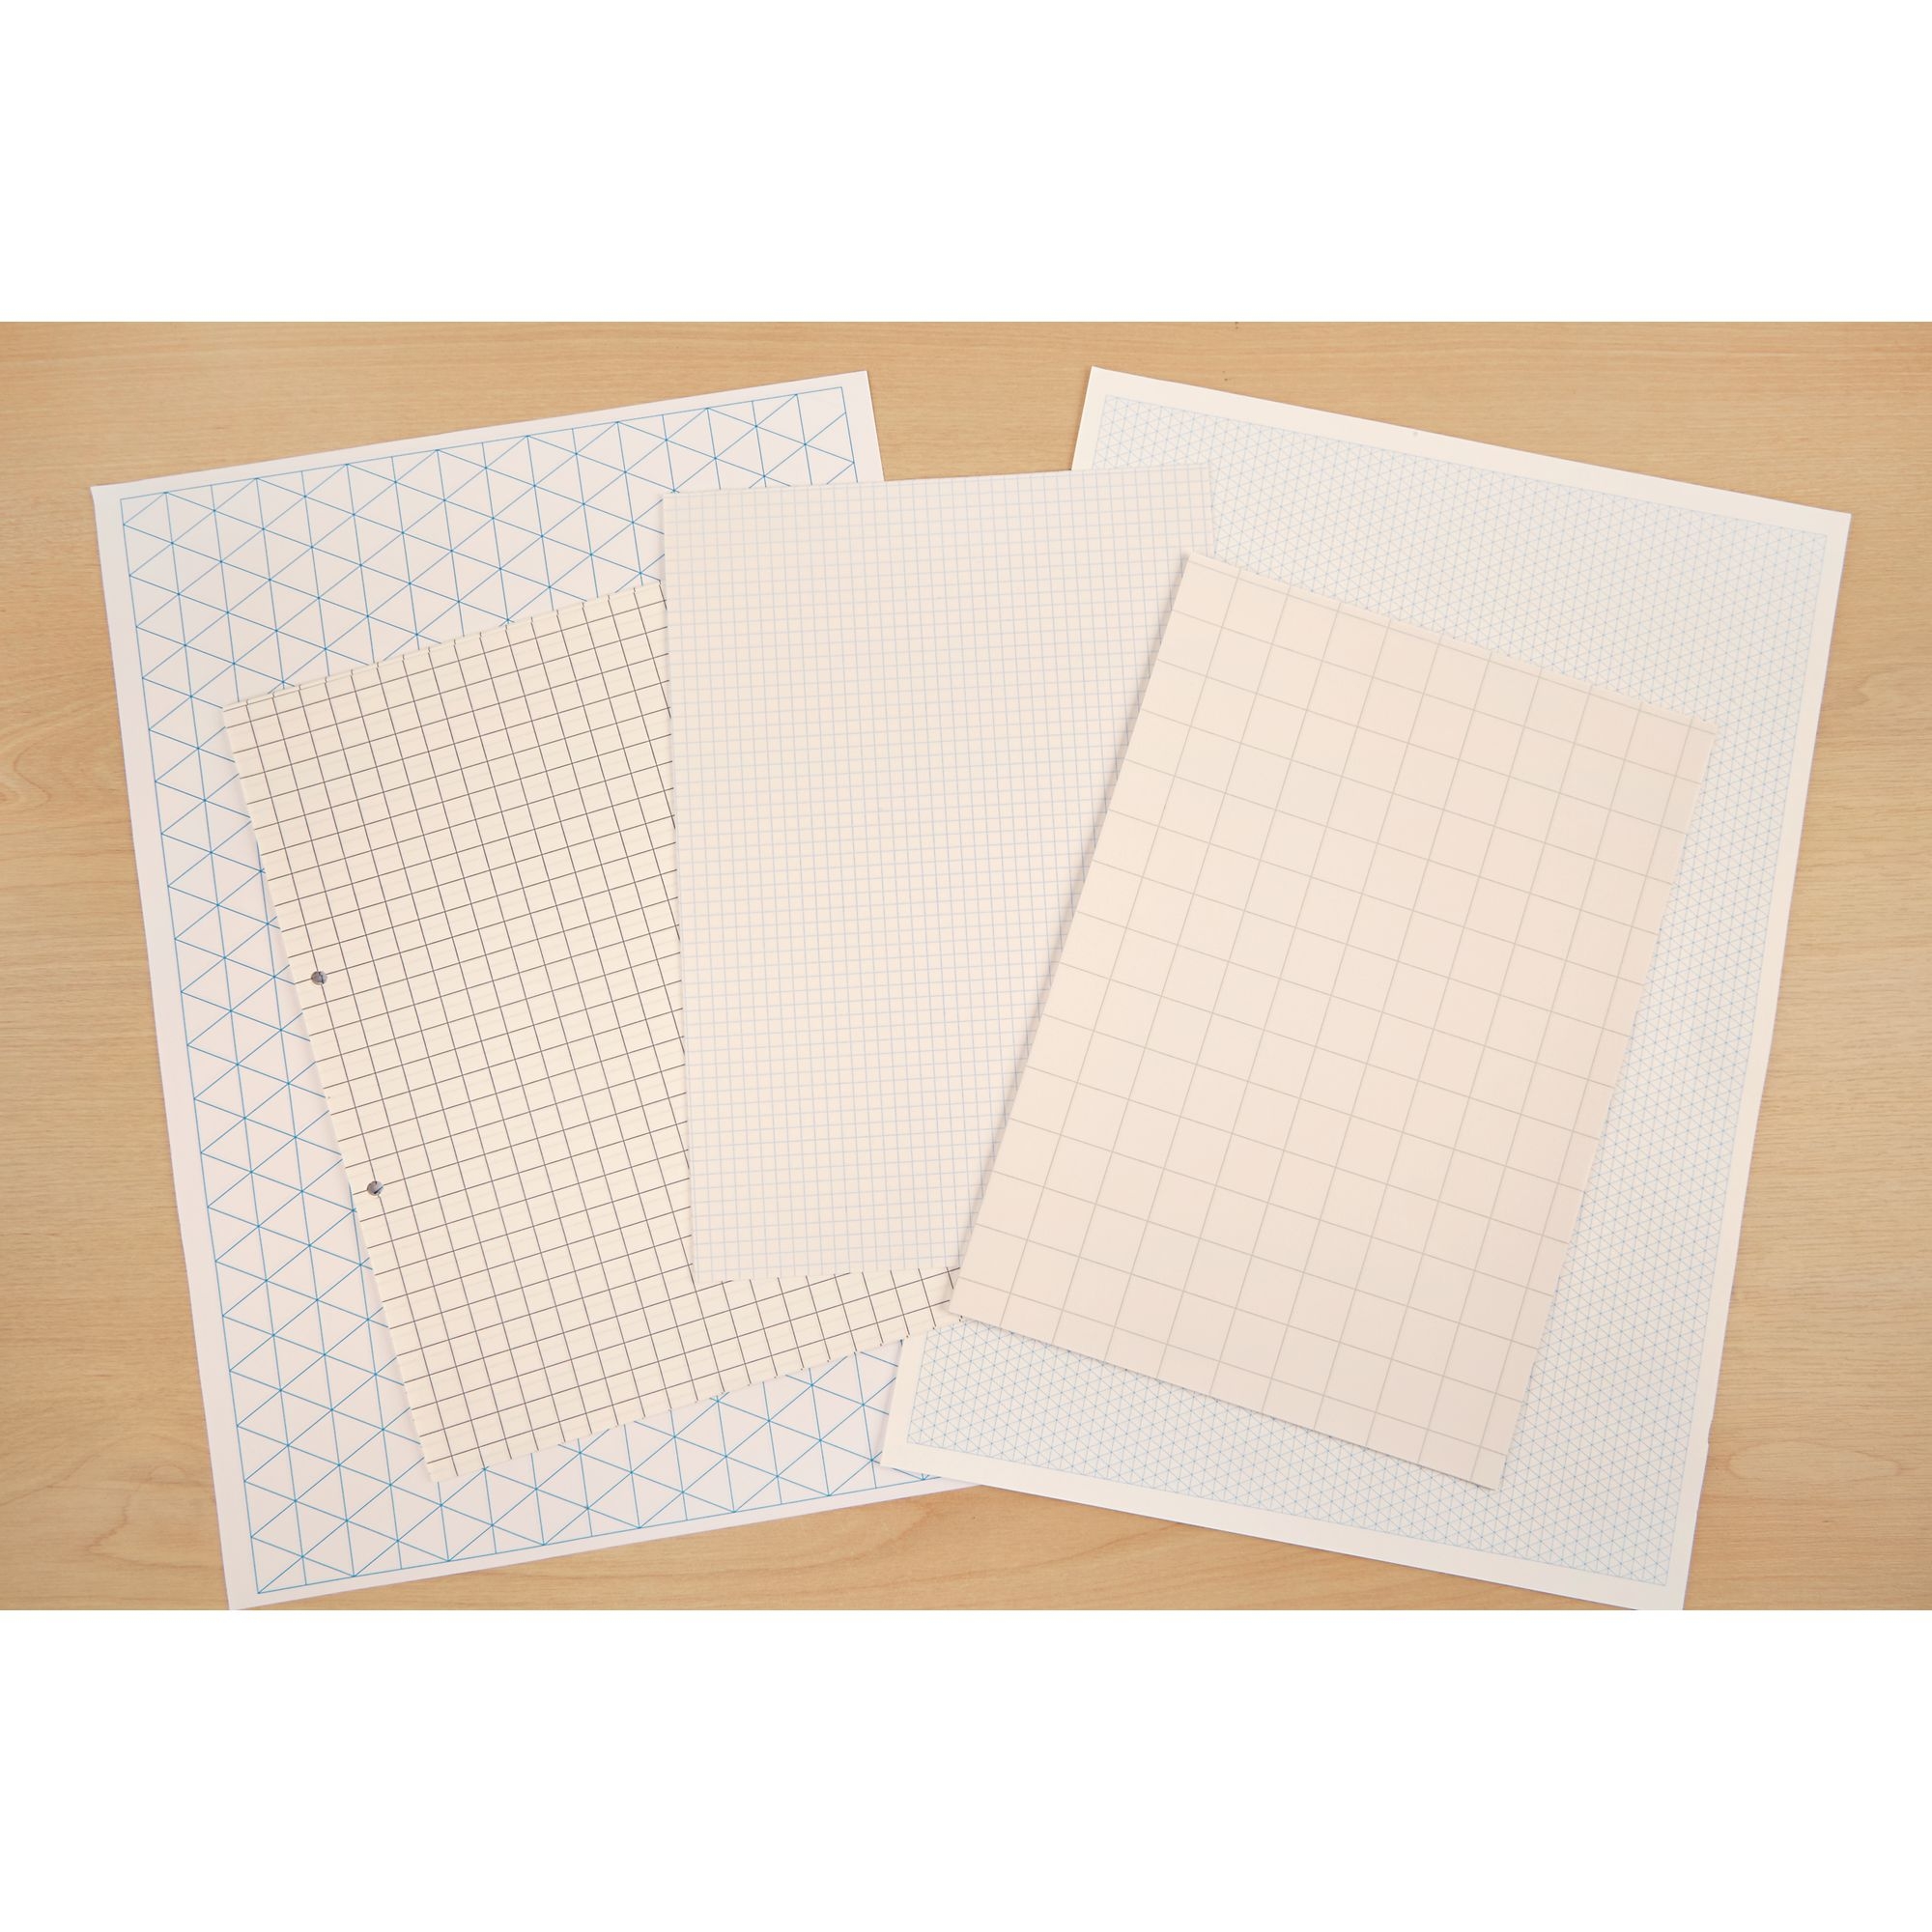 A4 Maths Paper, 10mm Squared, Unpunched - 1 Ream